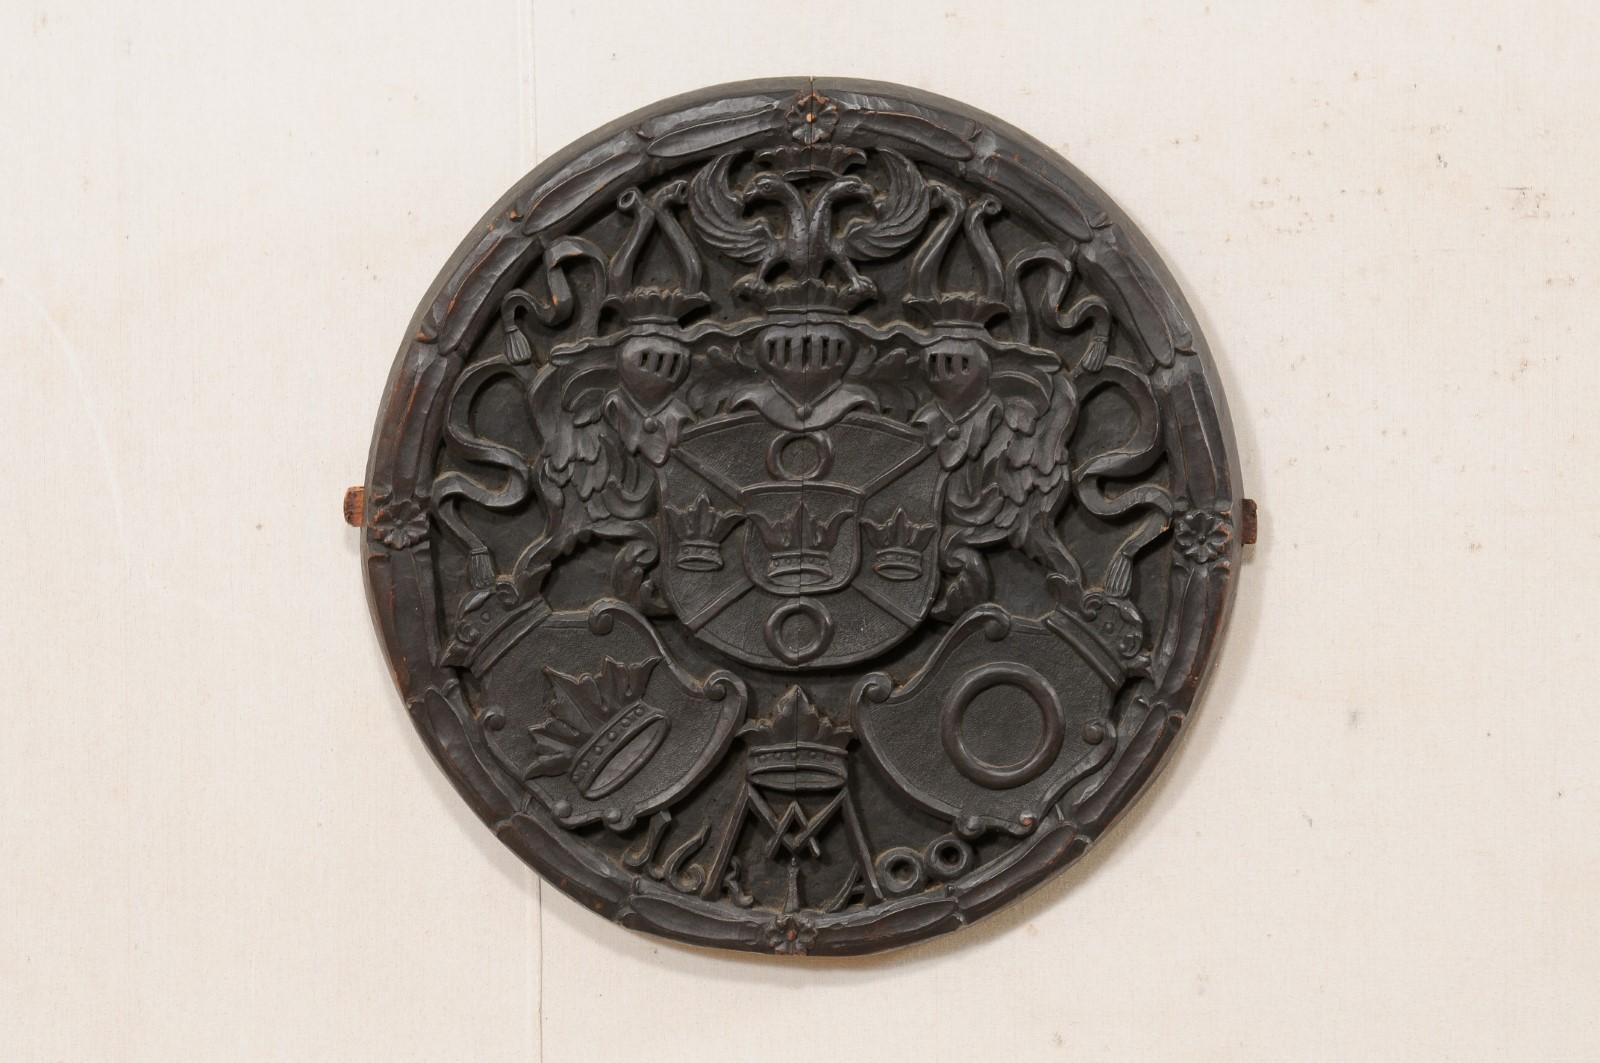 An English carved wood plaque from the later 19th century. This antique wall decoration from England, which is circular-shaped and 2 feet in diameter, has been hand-carved with a shield of crowns at center with three knights above, and pair of